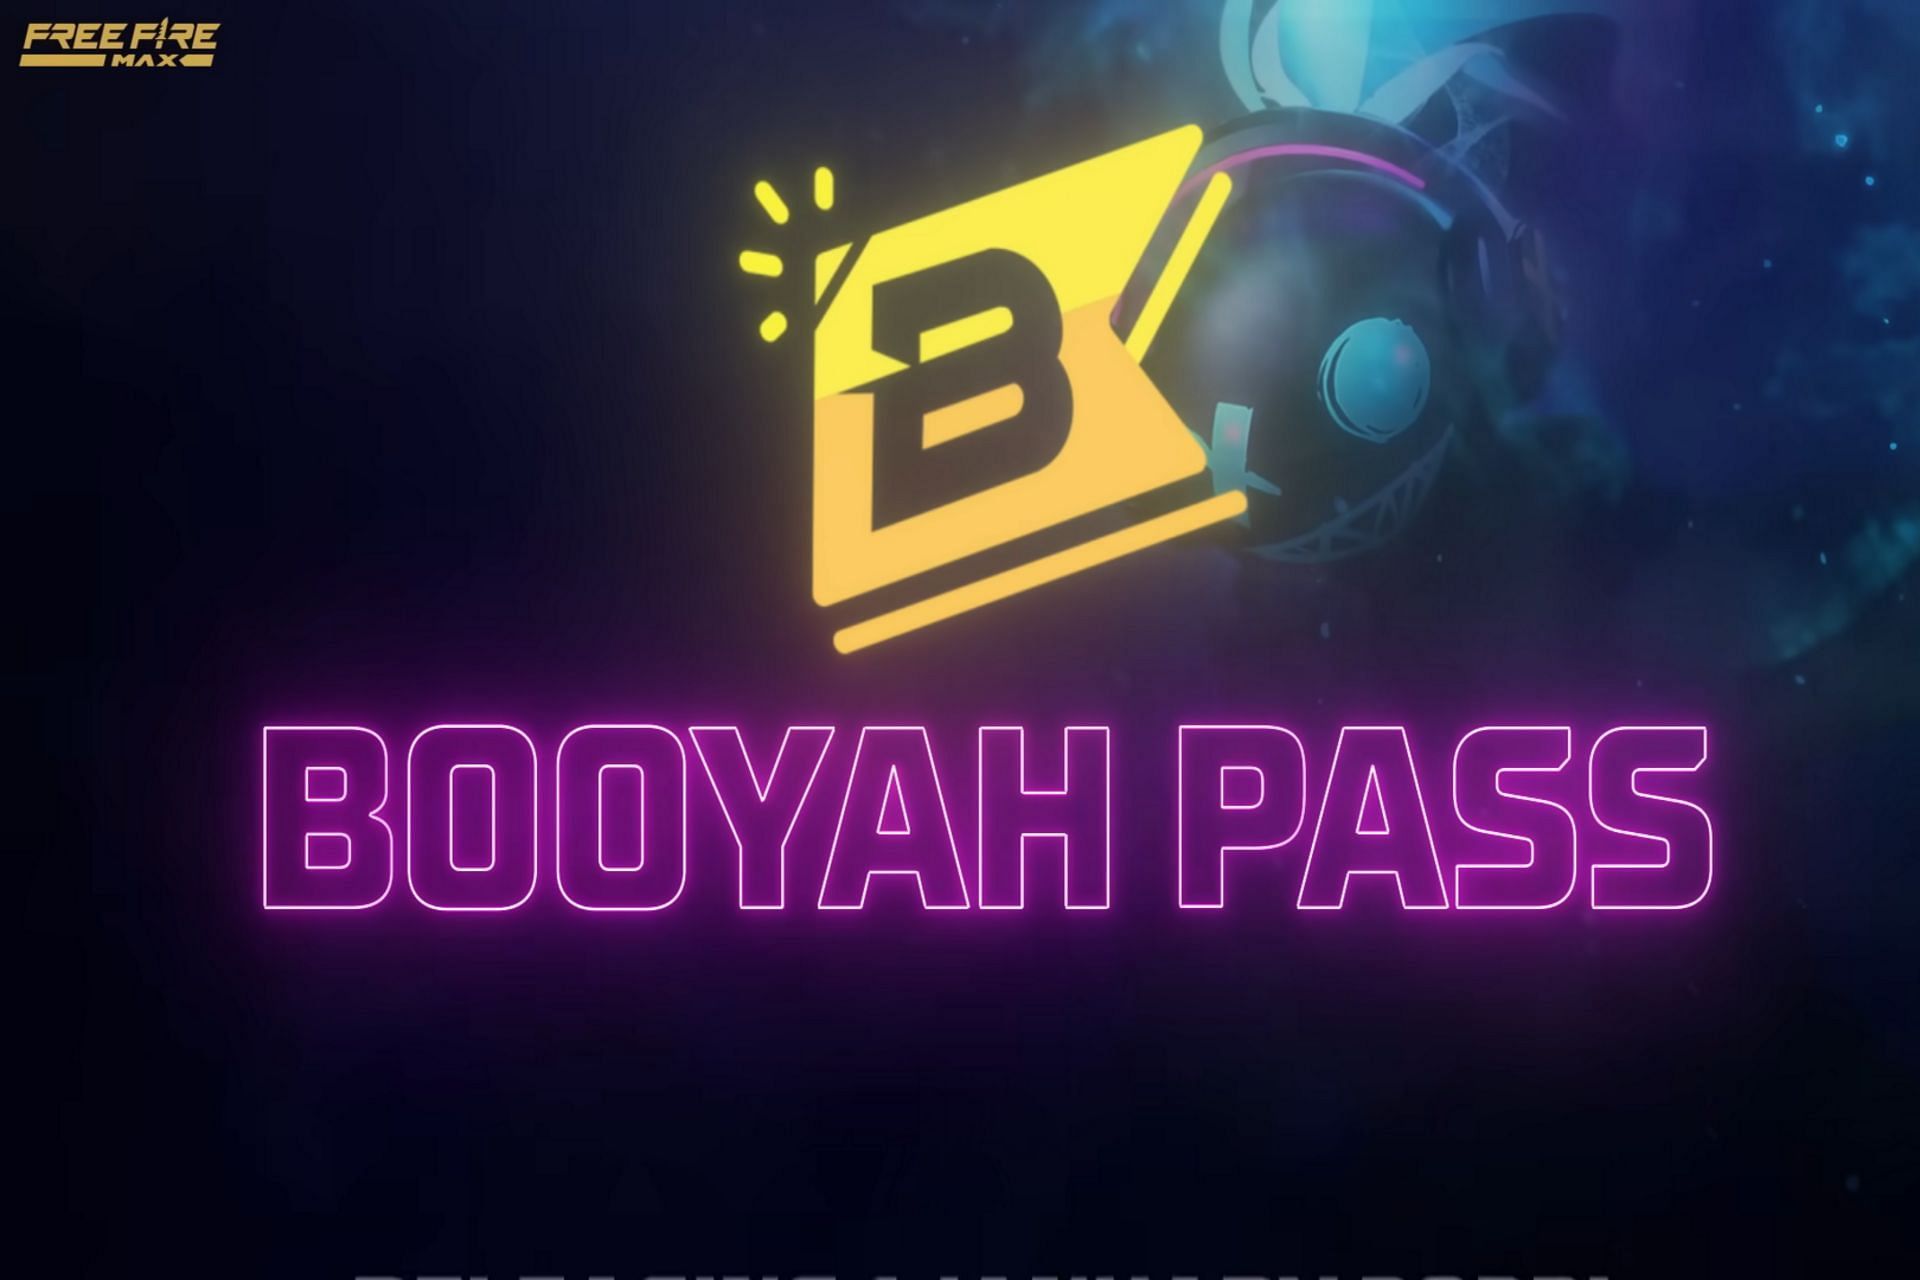 Booyah Pass is arriving on January 1, 2023 (Image via Garena)